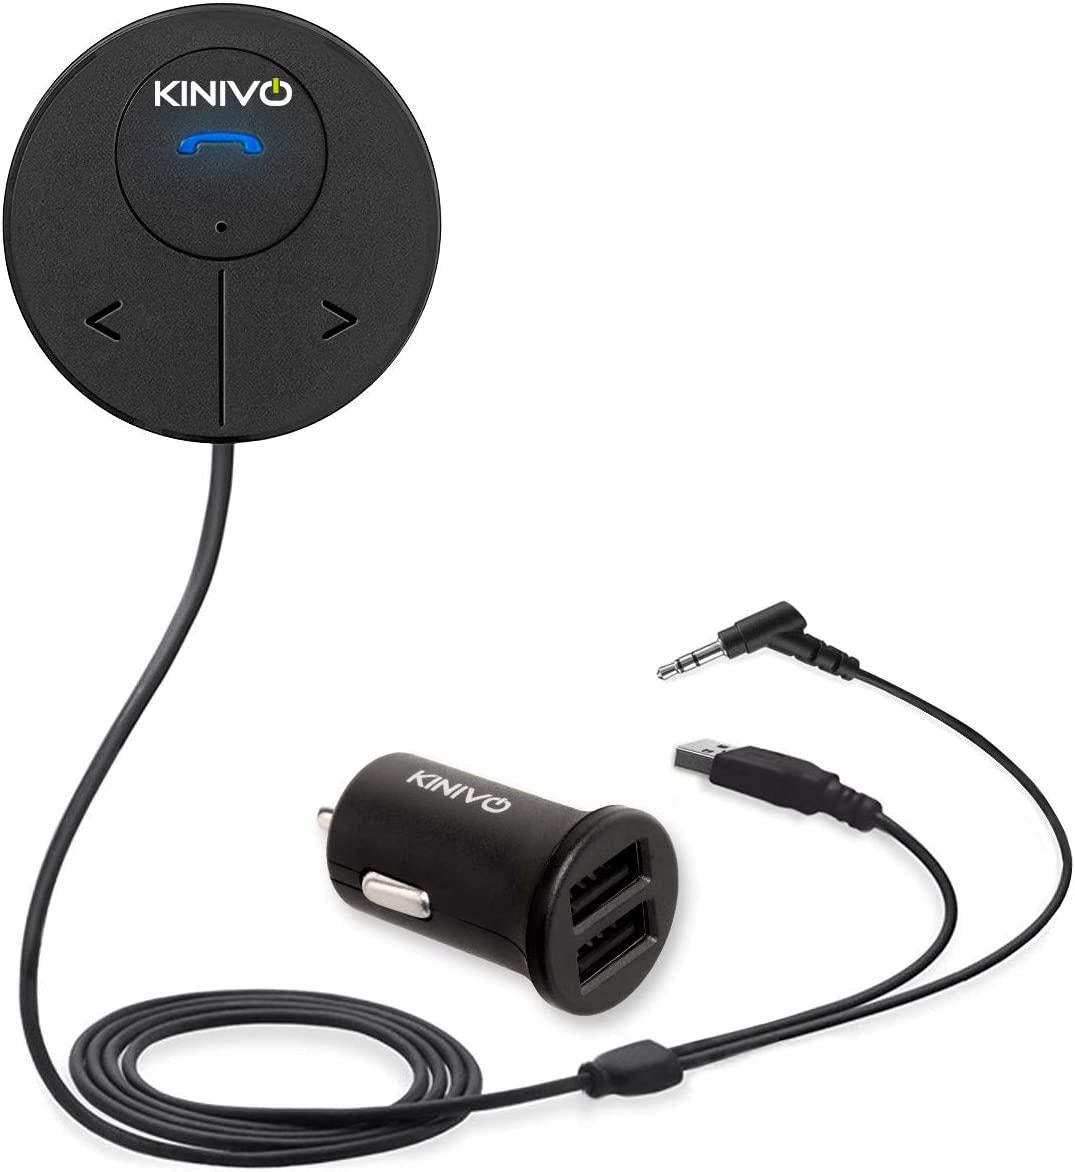 Kinivo, Kinivo BTC480 Bluetooth Car Kit Hands-Free Calling and Music Streaming (for Cars with 3.5mm Aux Input, Magnetic Mount, Dual Port 2.1A USB Charger, Multi-Point Connectivity)